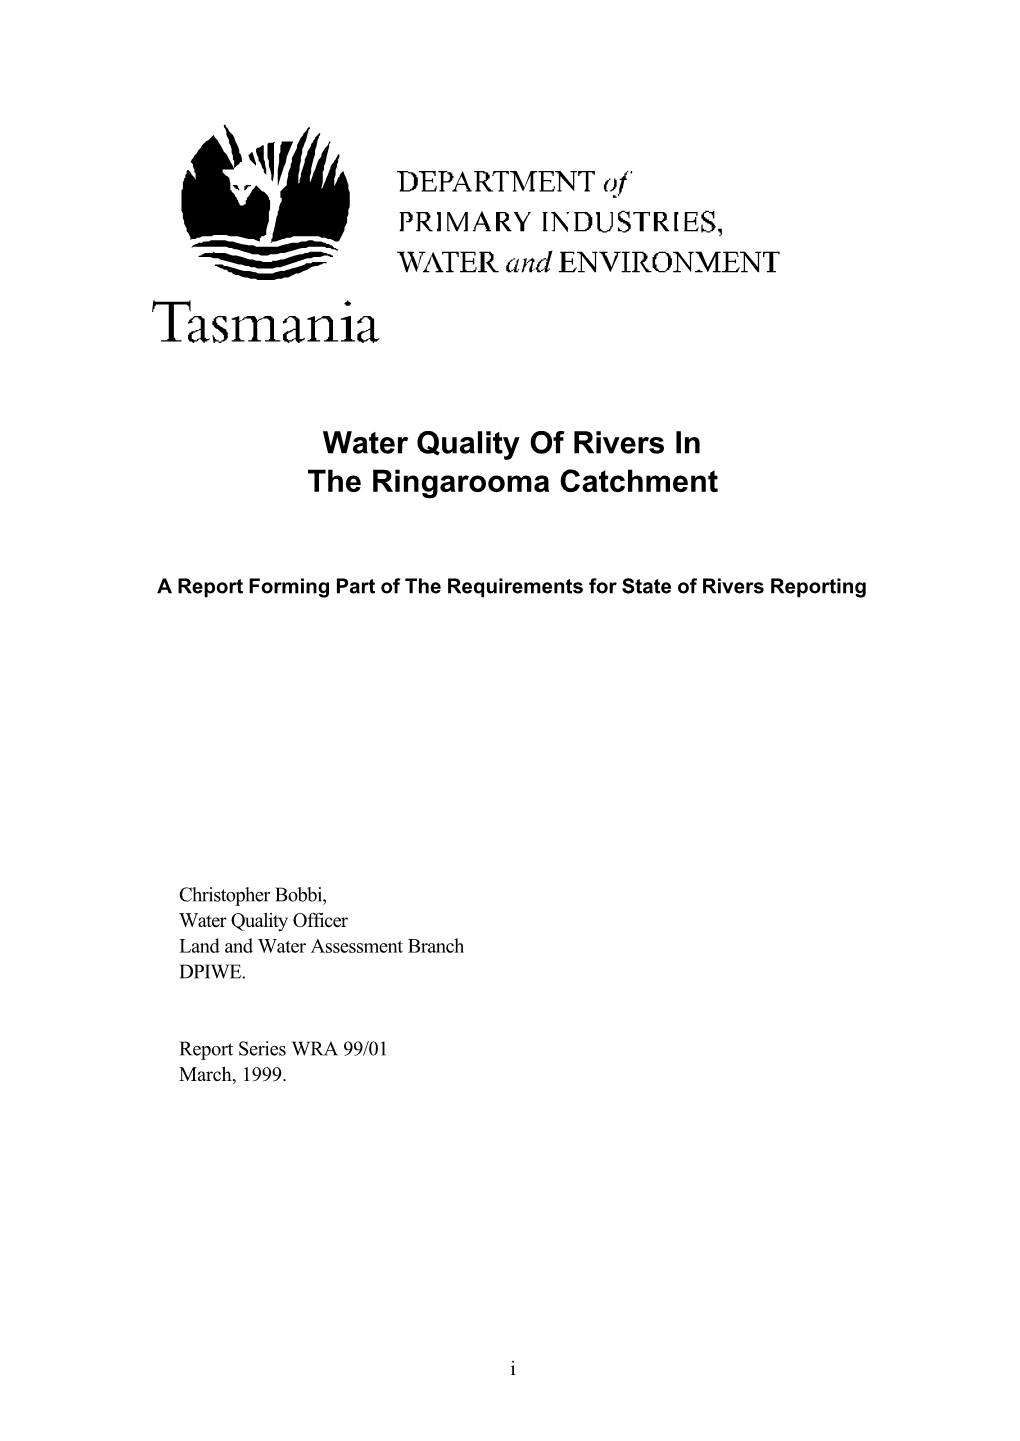 Water Quality of Rivers in the Ringarooma Catchment